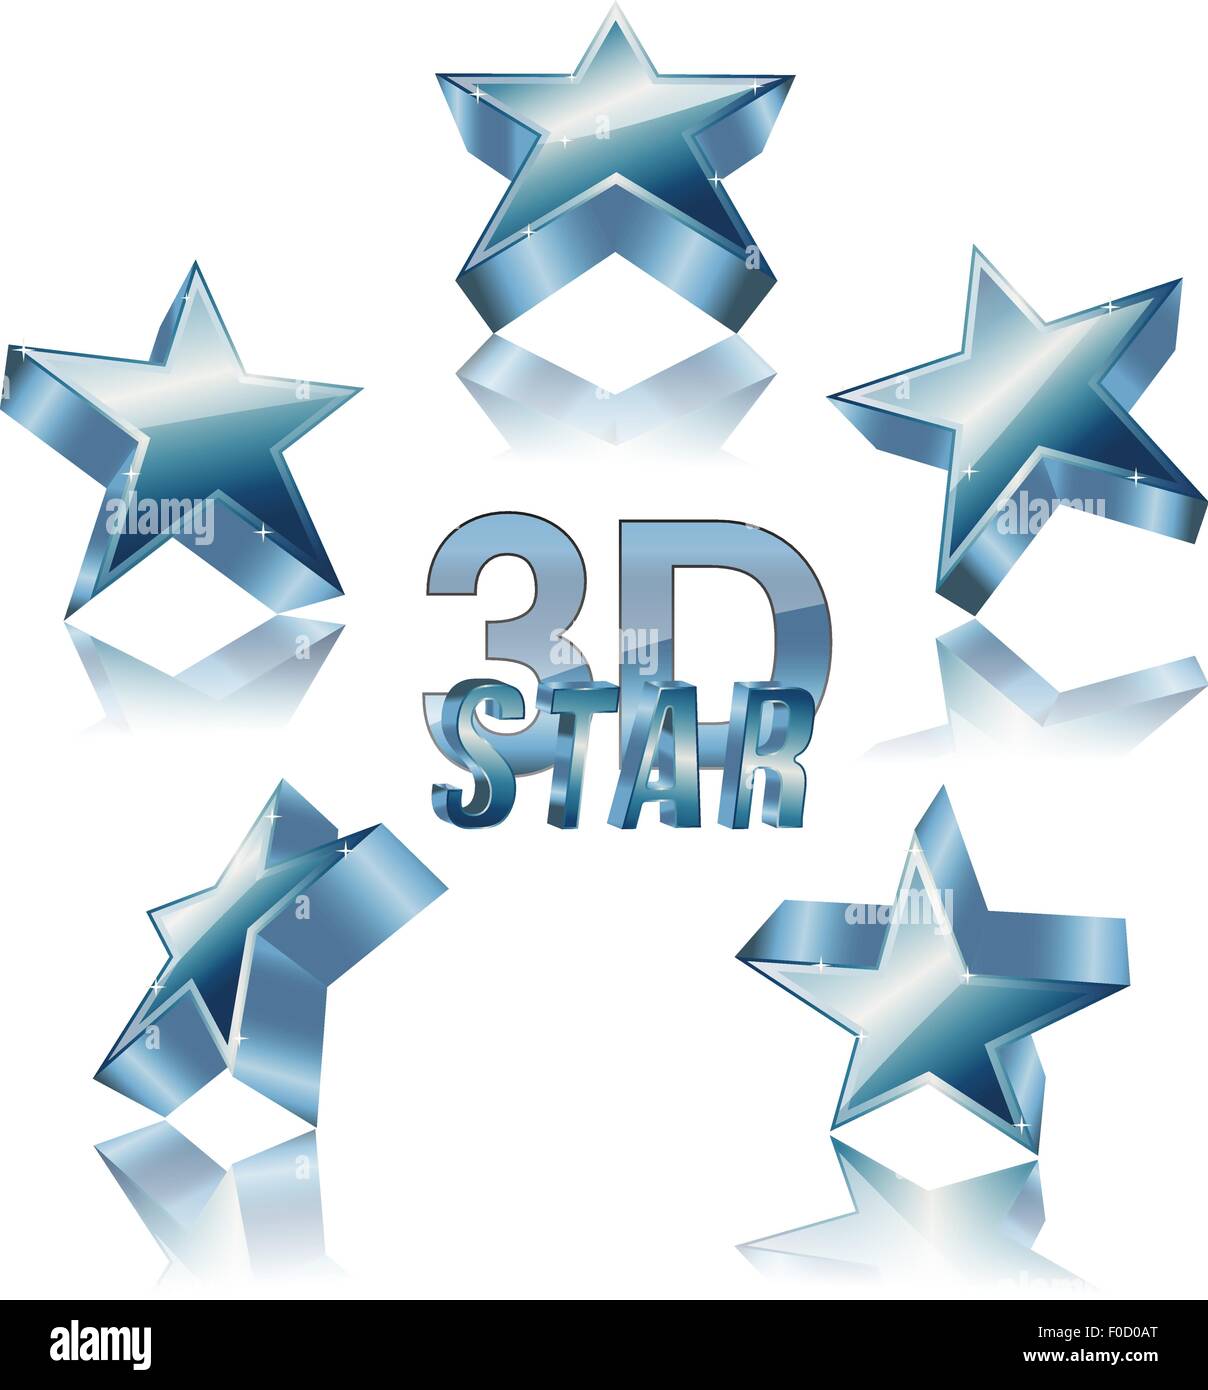 3d blue star set with reflection Stock Vector